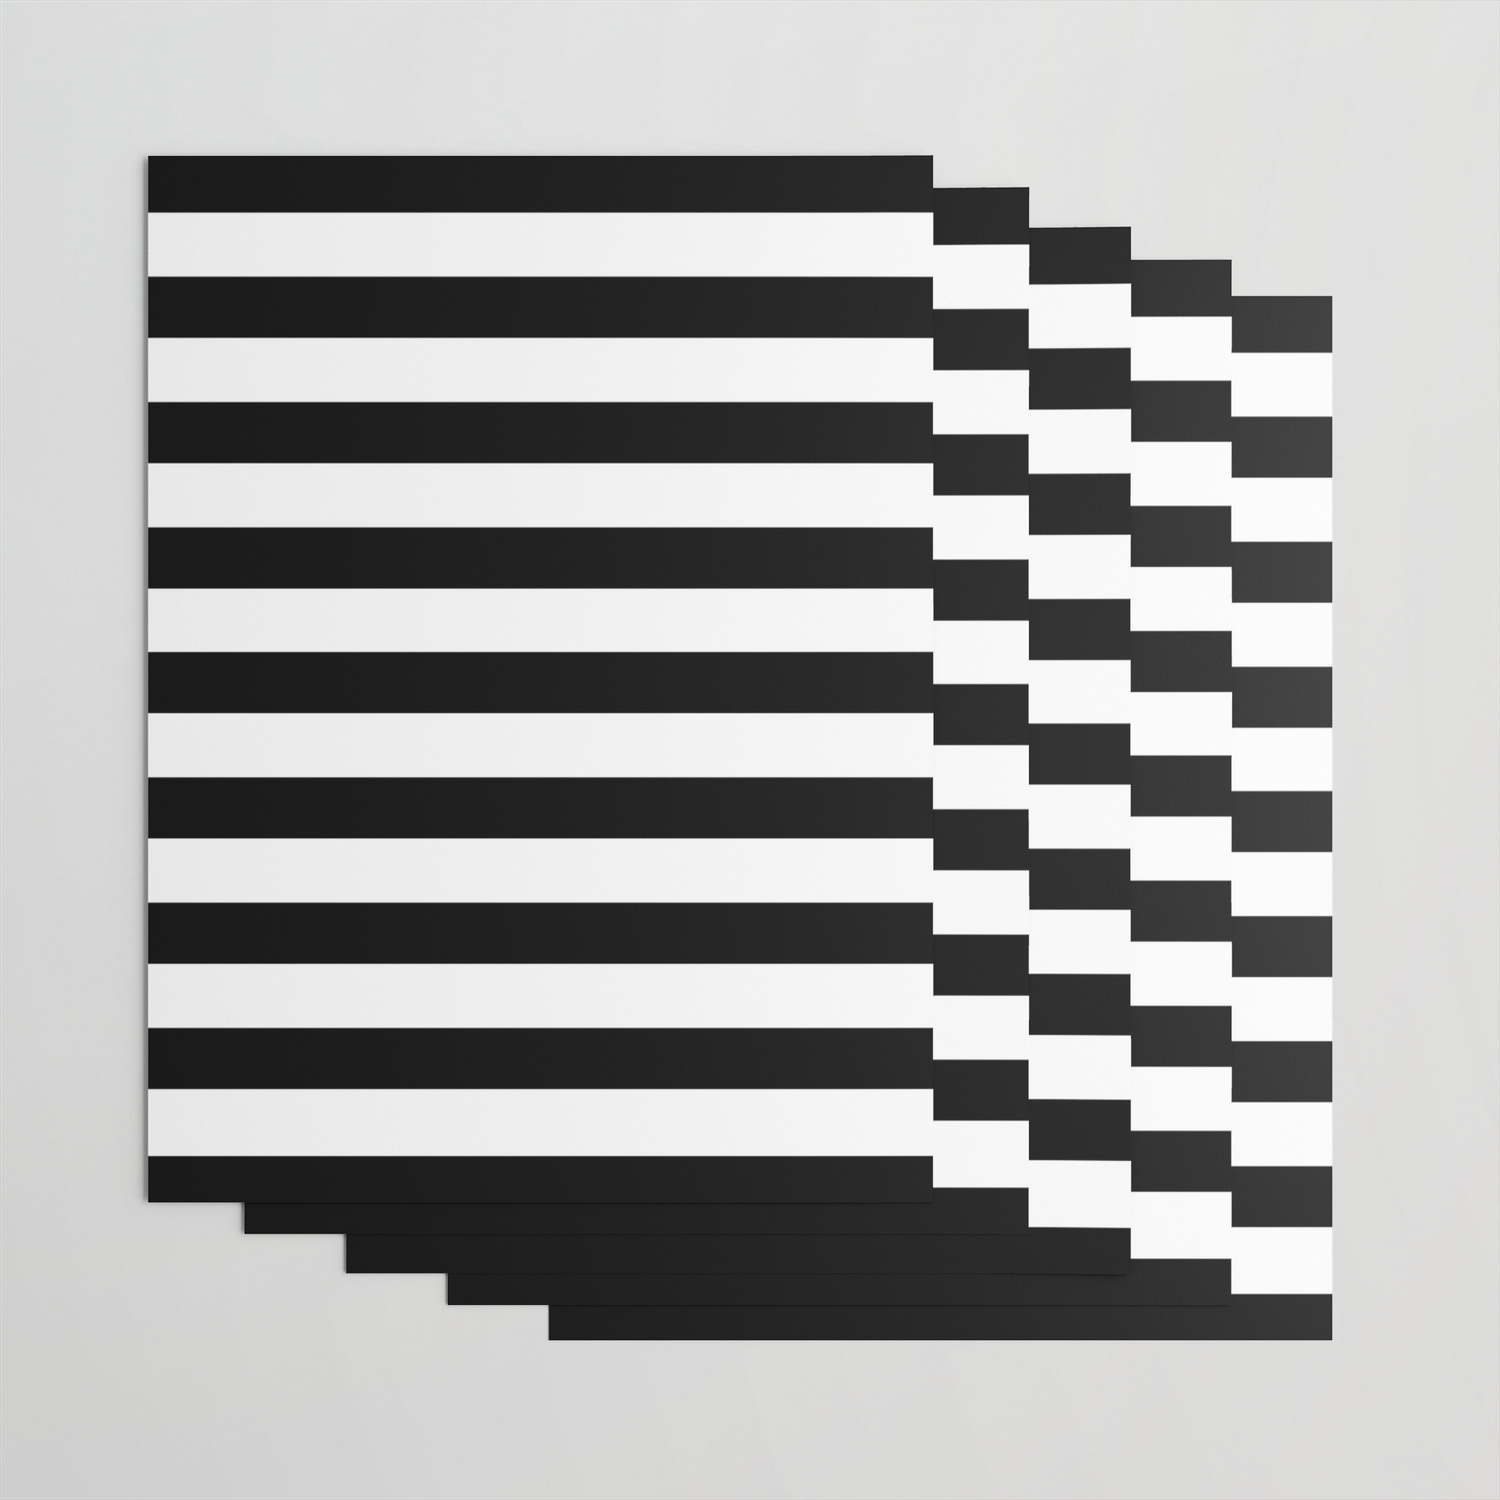 grey striped wrapping paper